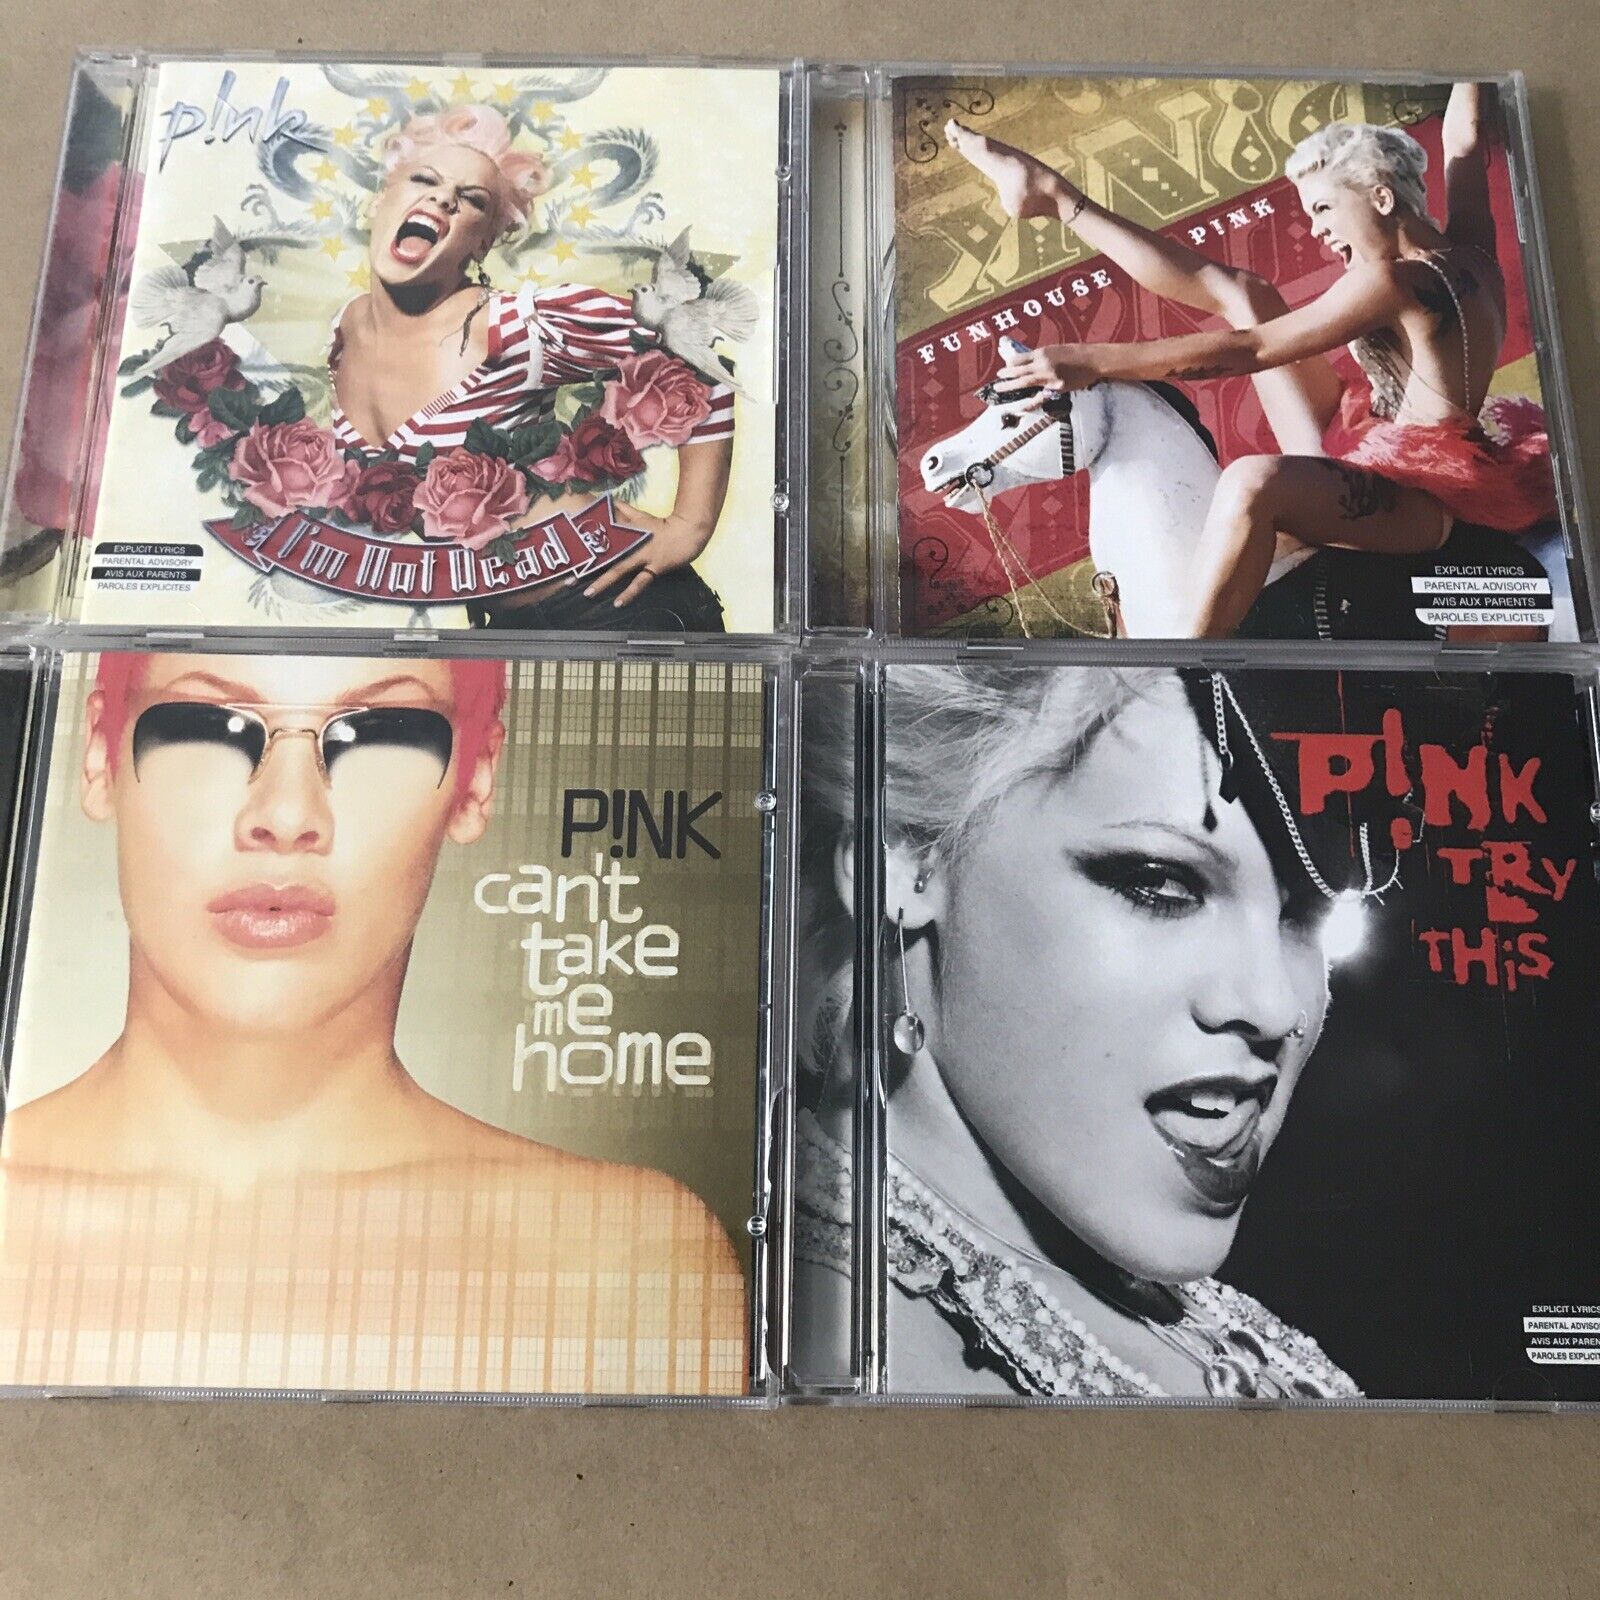 PINK CD collection lot of 4 cds